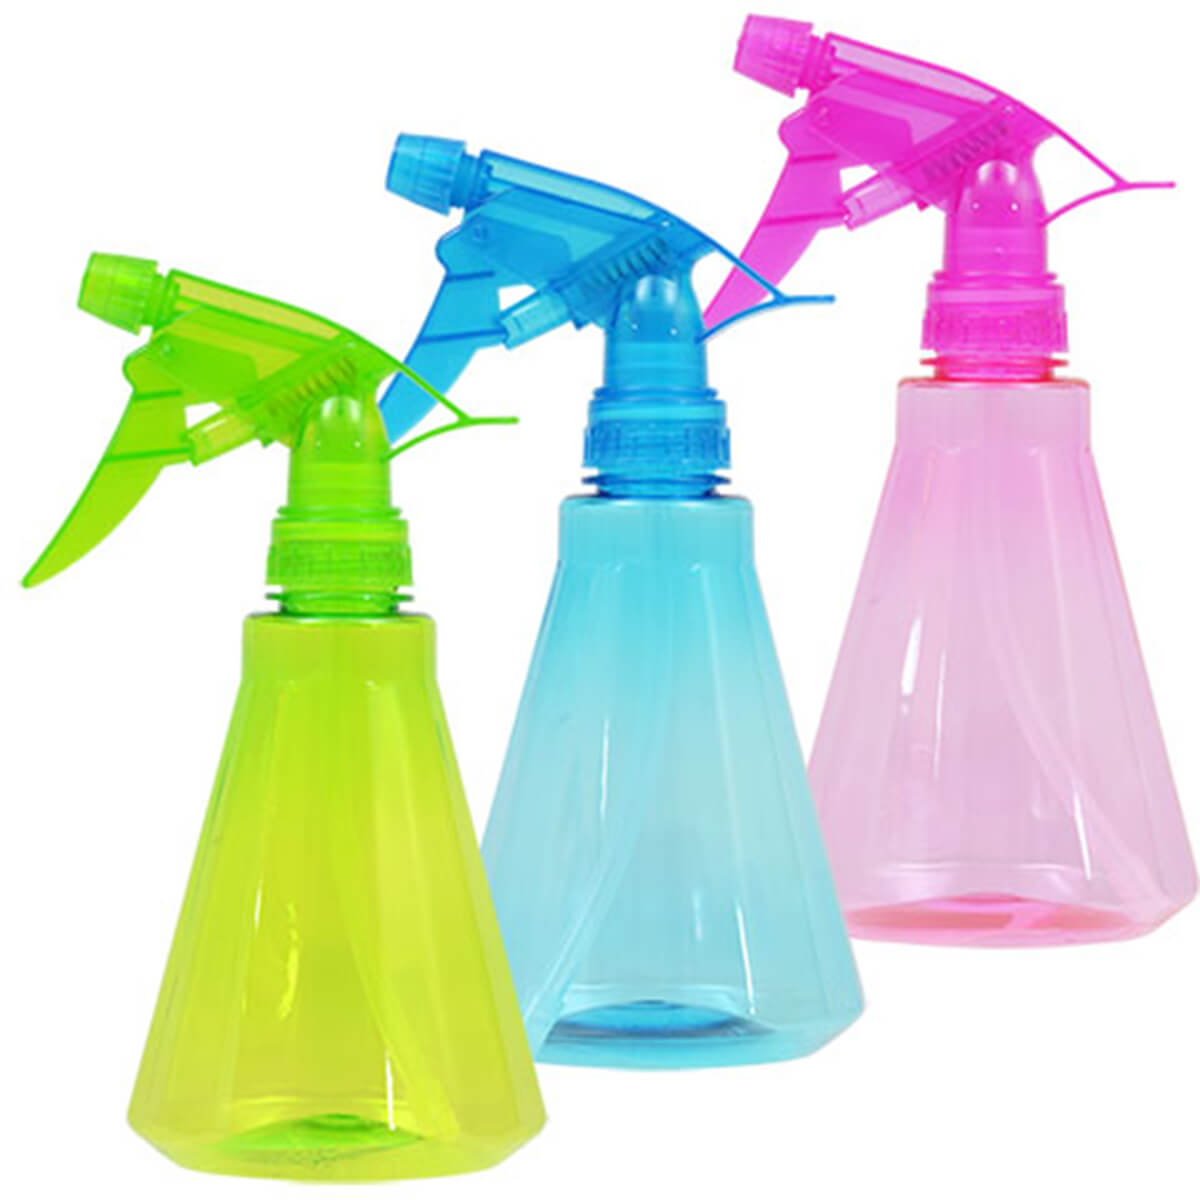 Spray bottle for your vinegar and water cleaning solution